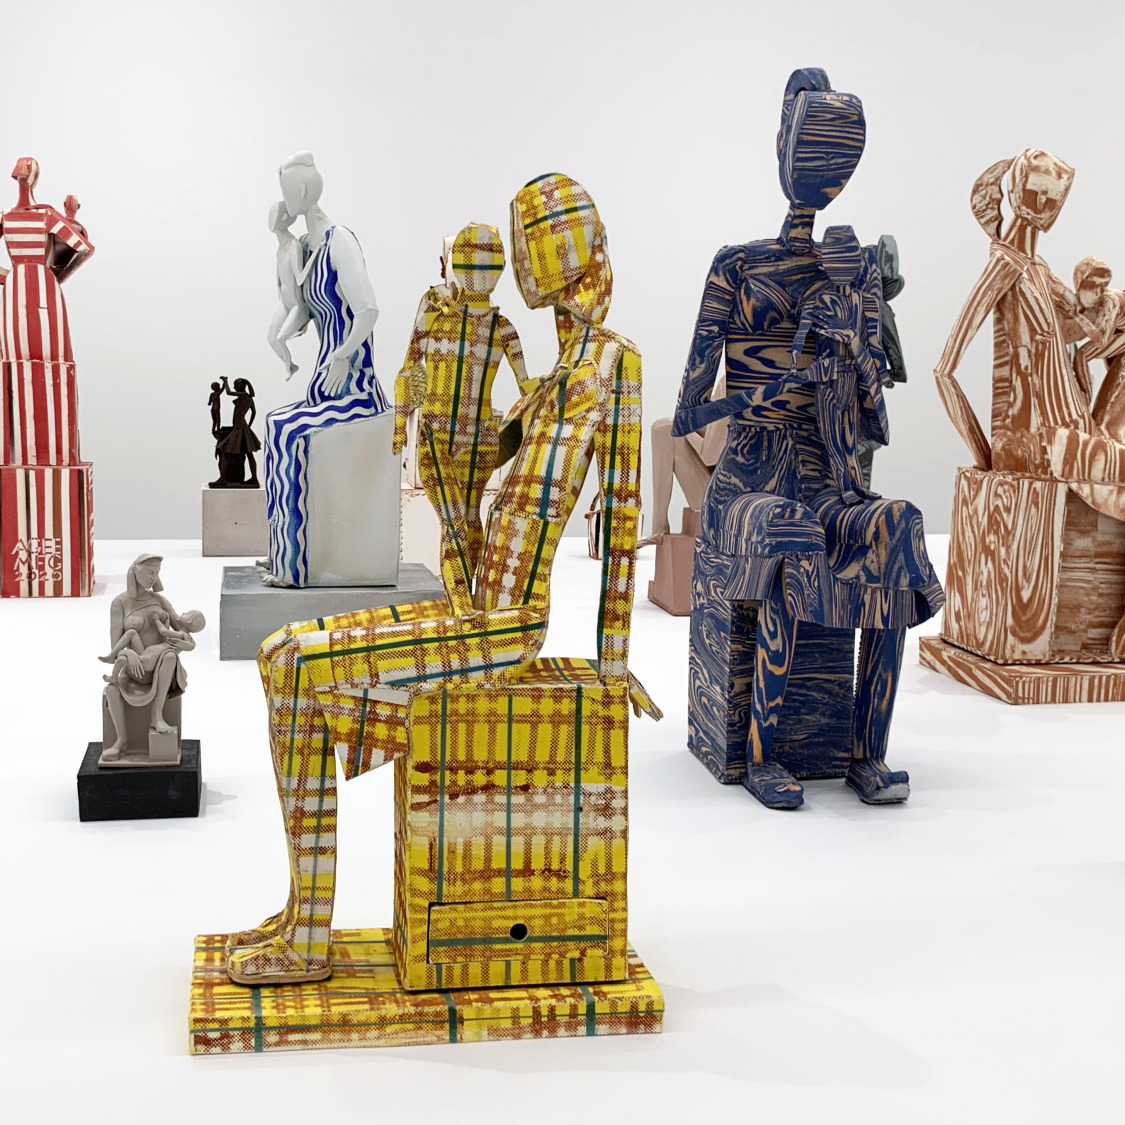 Exhibition Digest | August 2021: Objects Of Identity